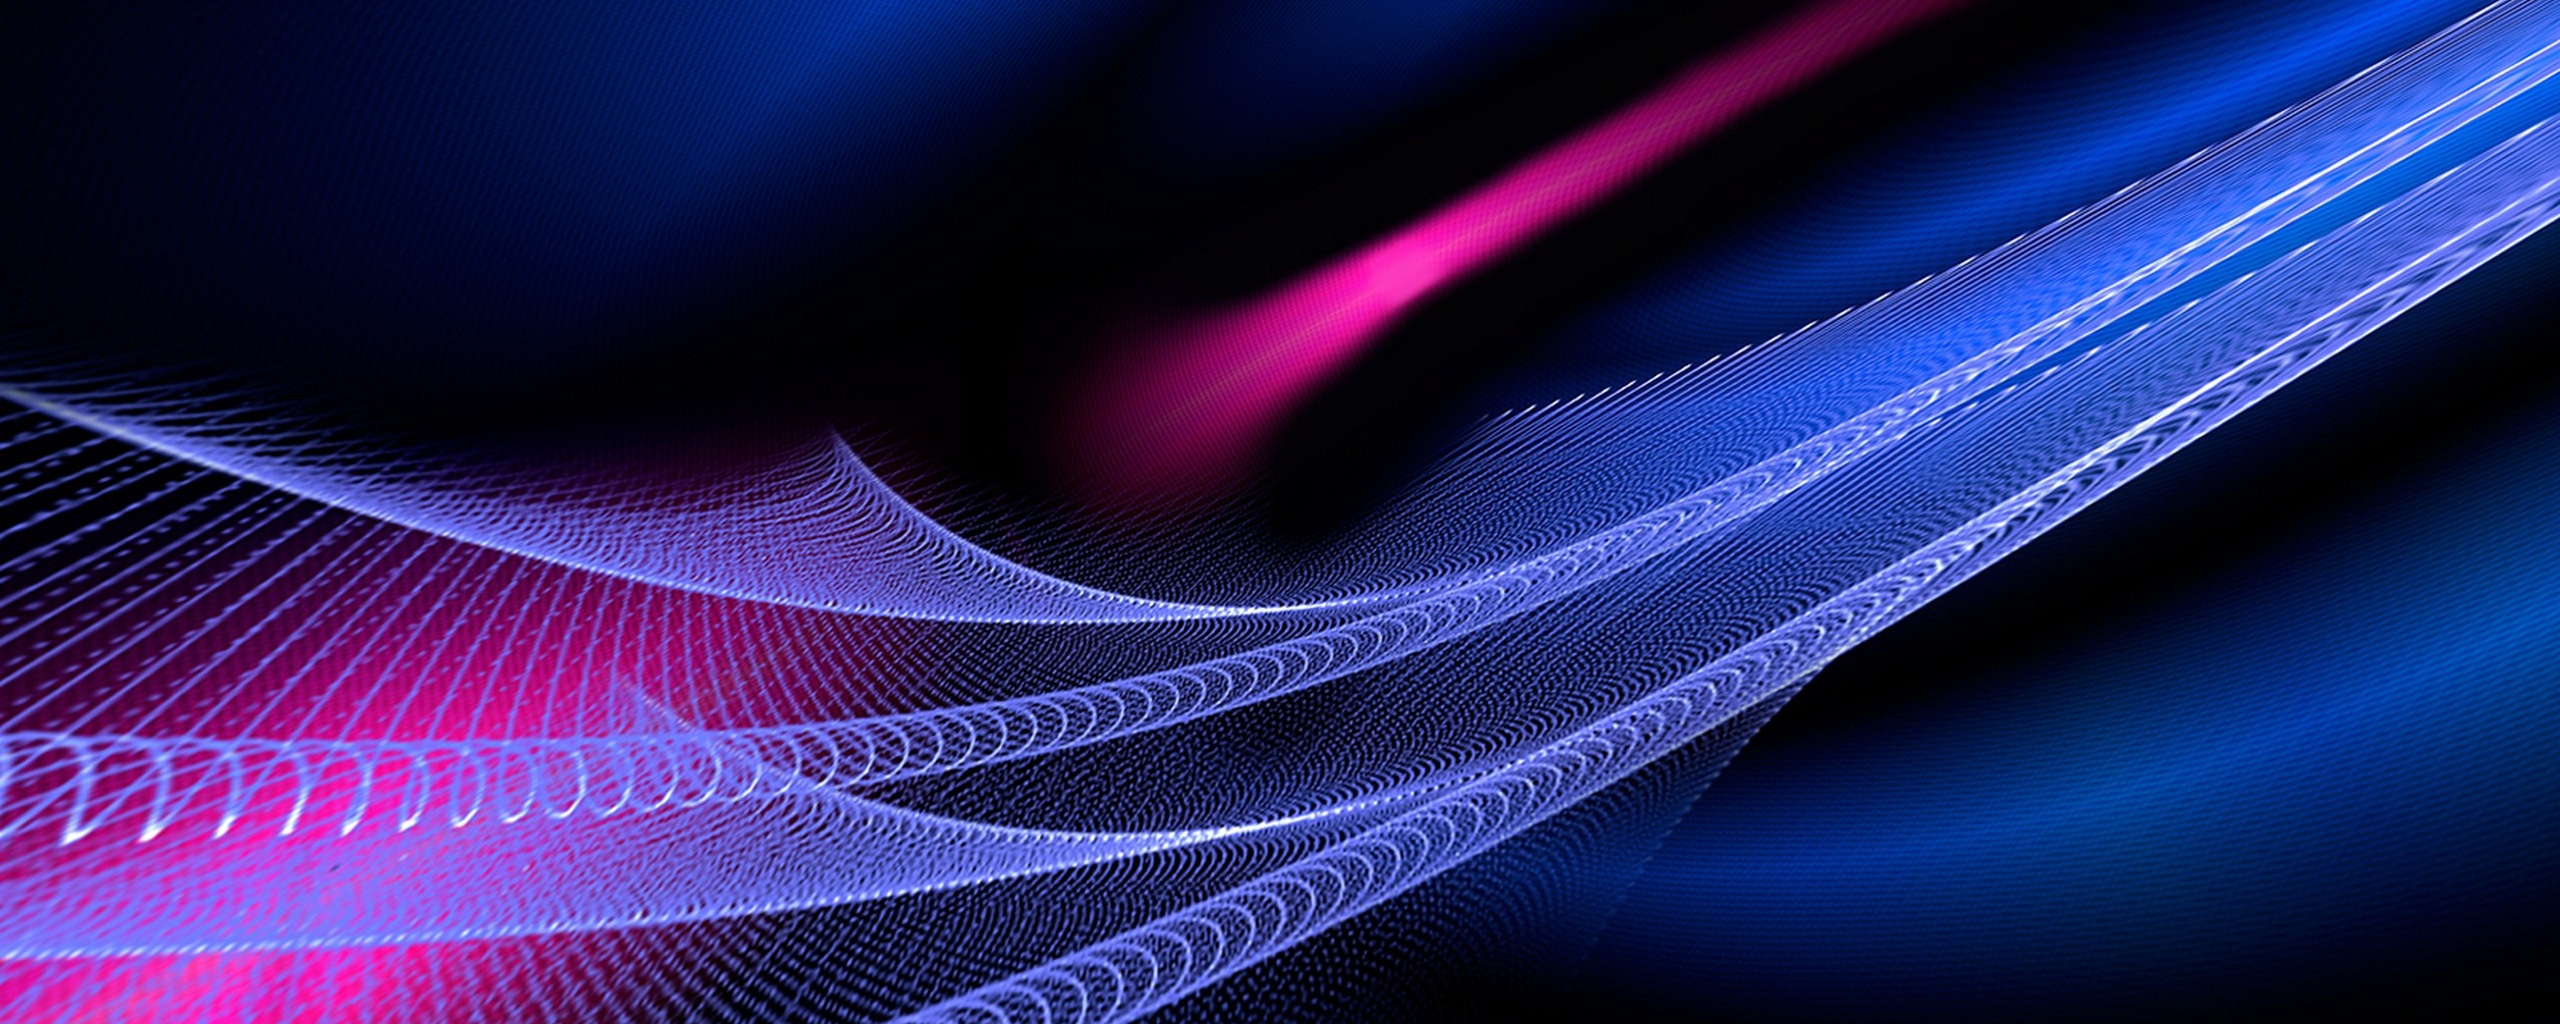 Wallpaper 2560x1024 mesh abstract background color Dual Monitor 2560x1024